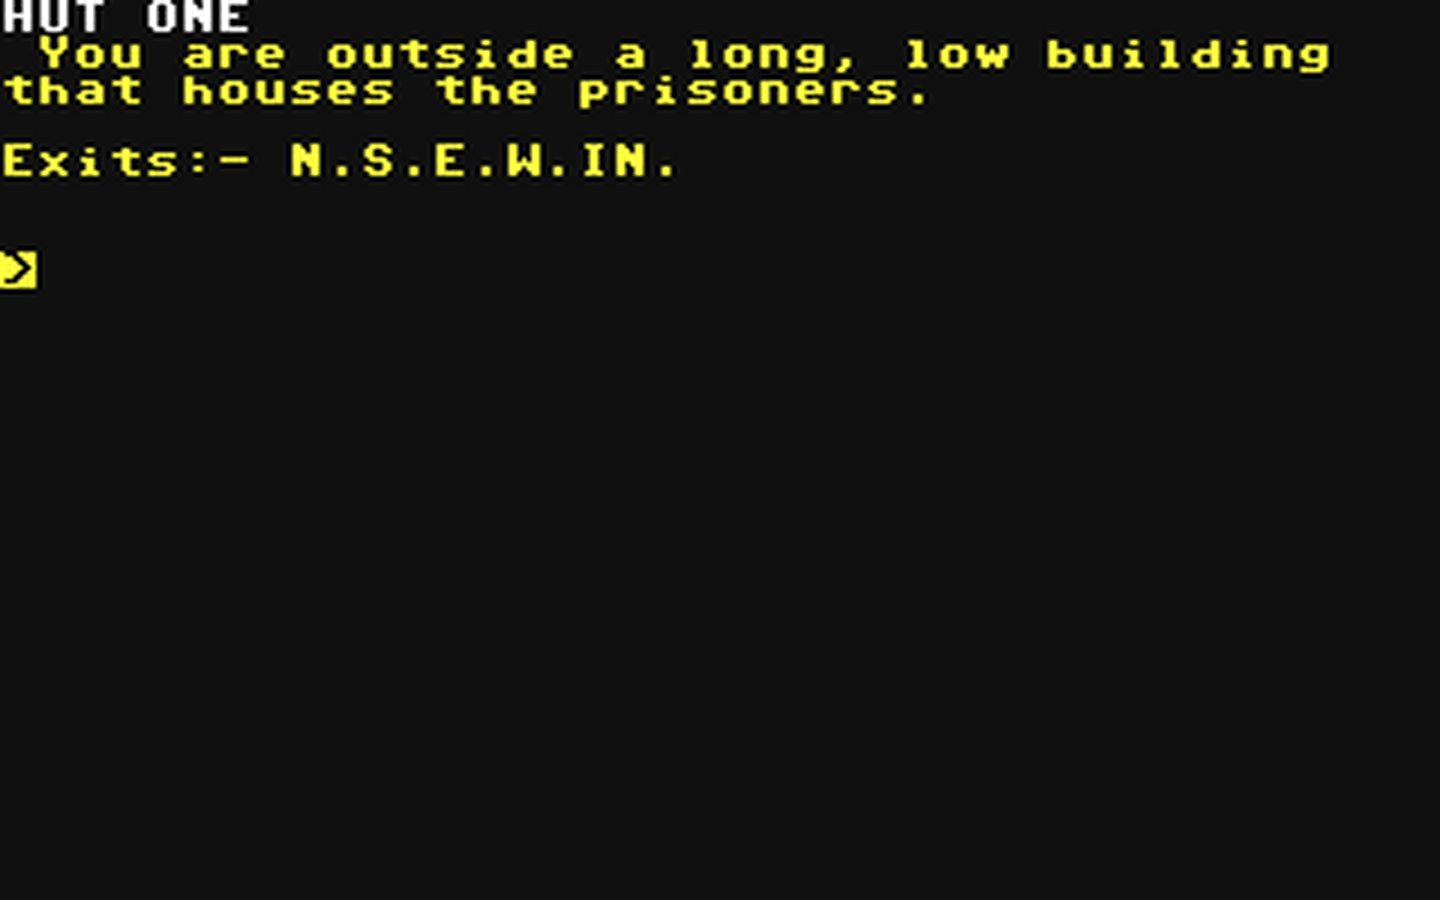 C64 GameBase Escaping_Habit,_The River_Software 1987